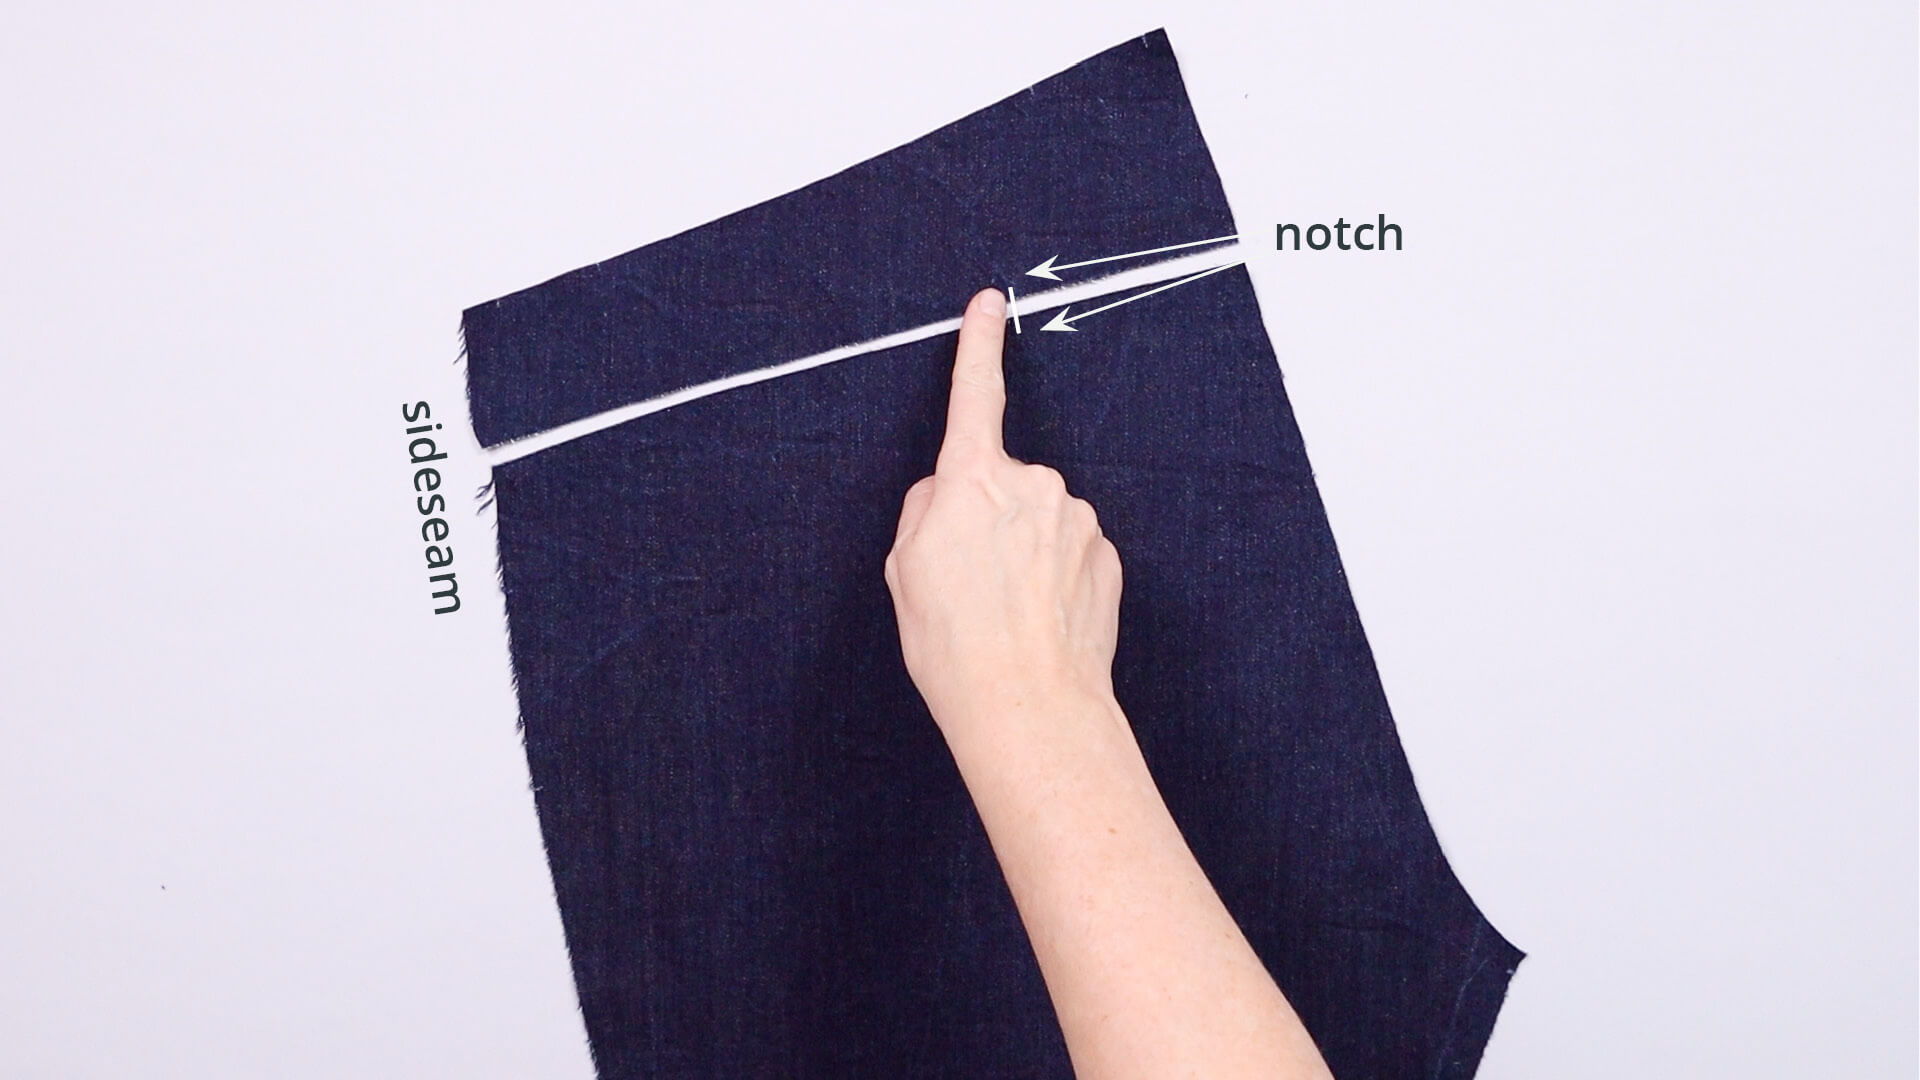 smartPATTERN sewing instructions for saddle and seat seam of a pair of denim pants - cut-out back trouser parts